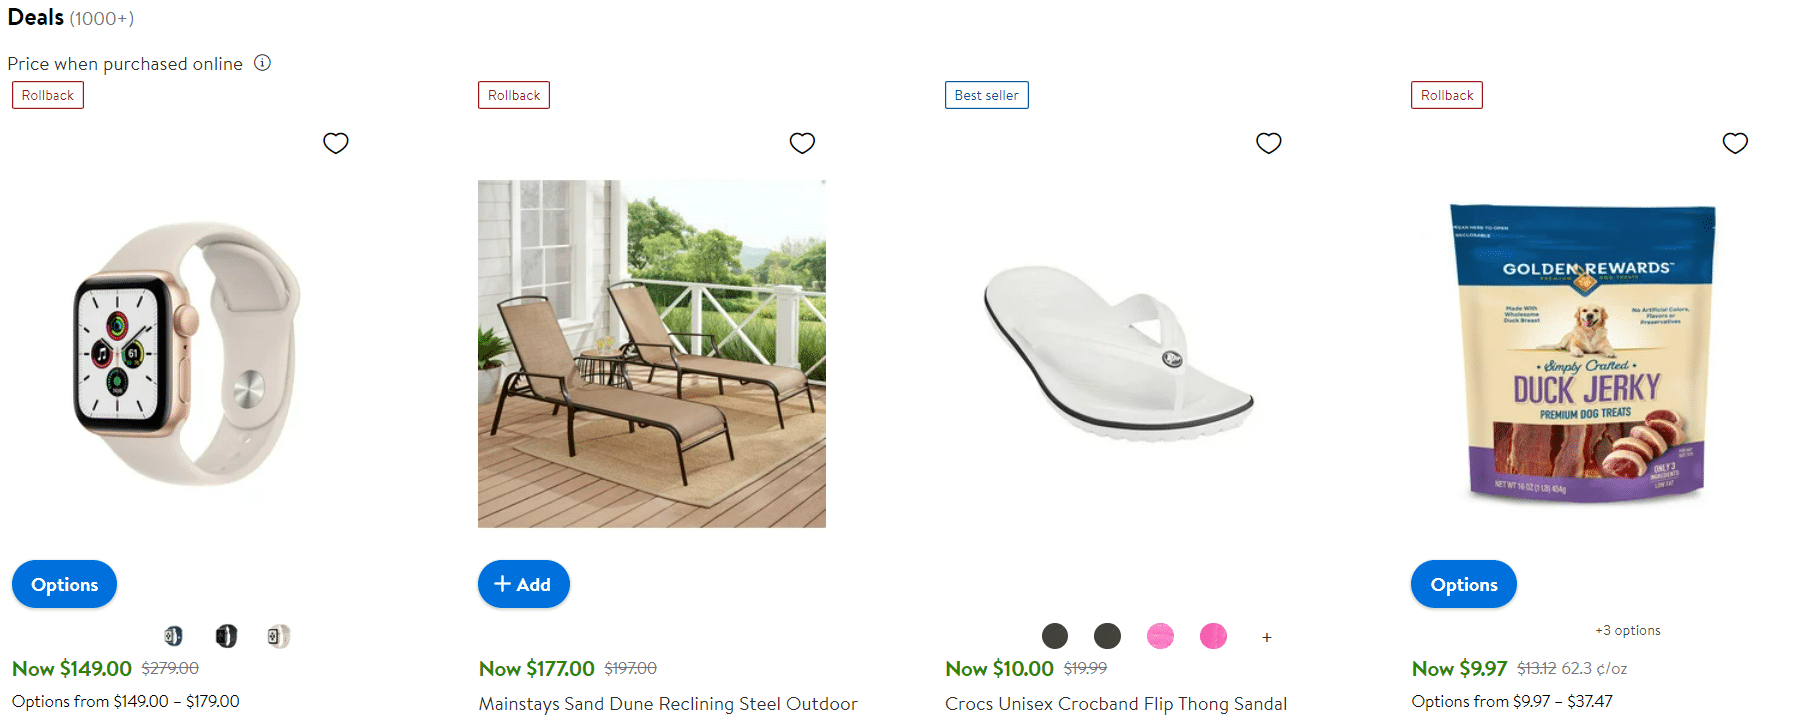 Discounted items found at Walmart's website